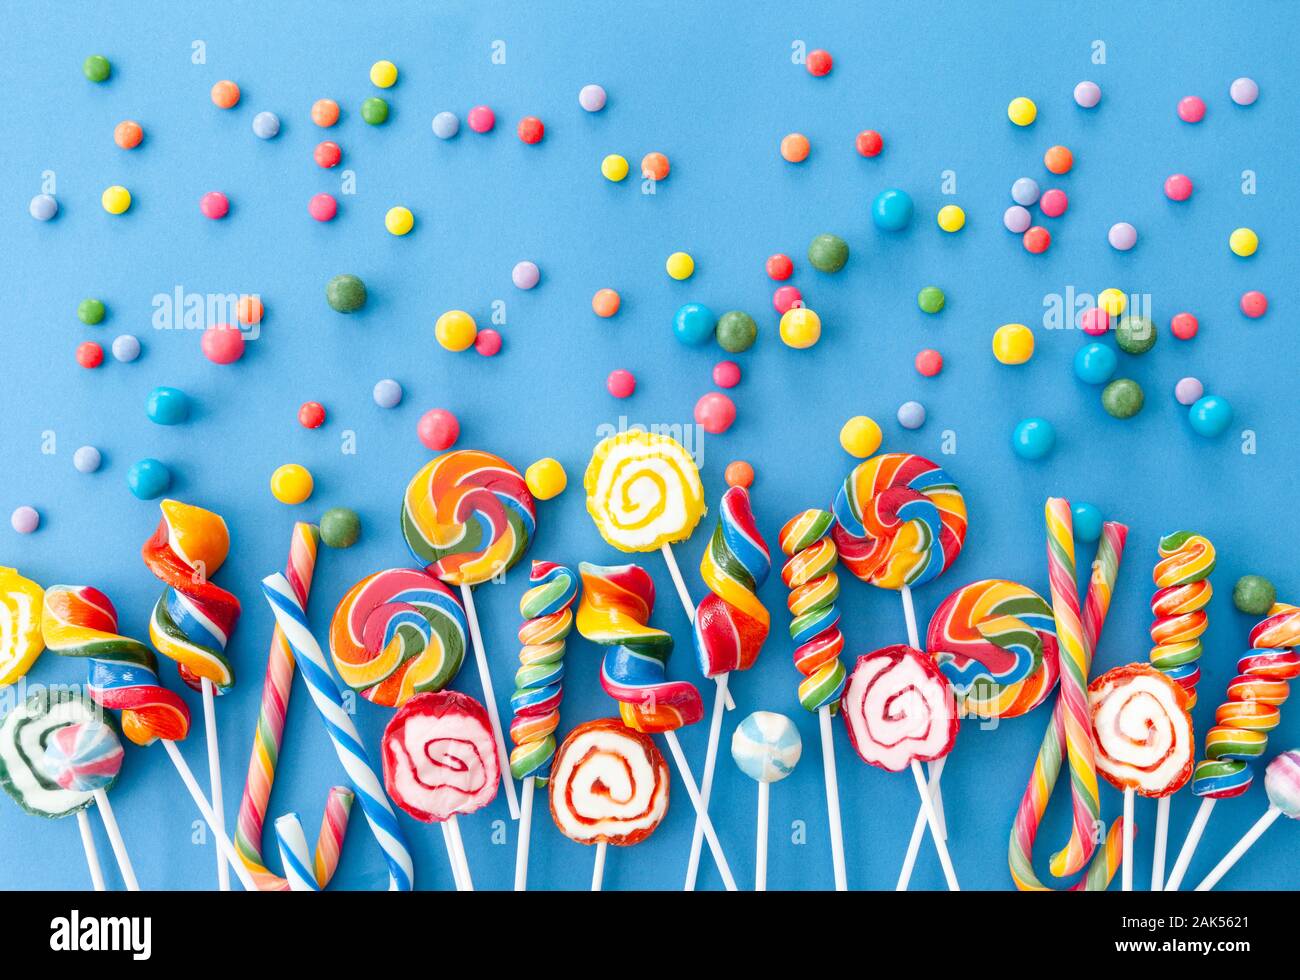 Colorful sweets and lollipops on a blue background Stock Photo